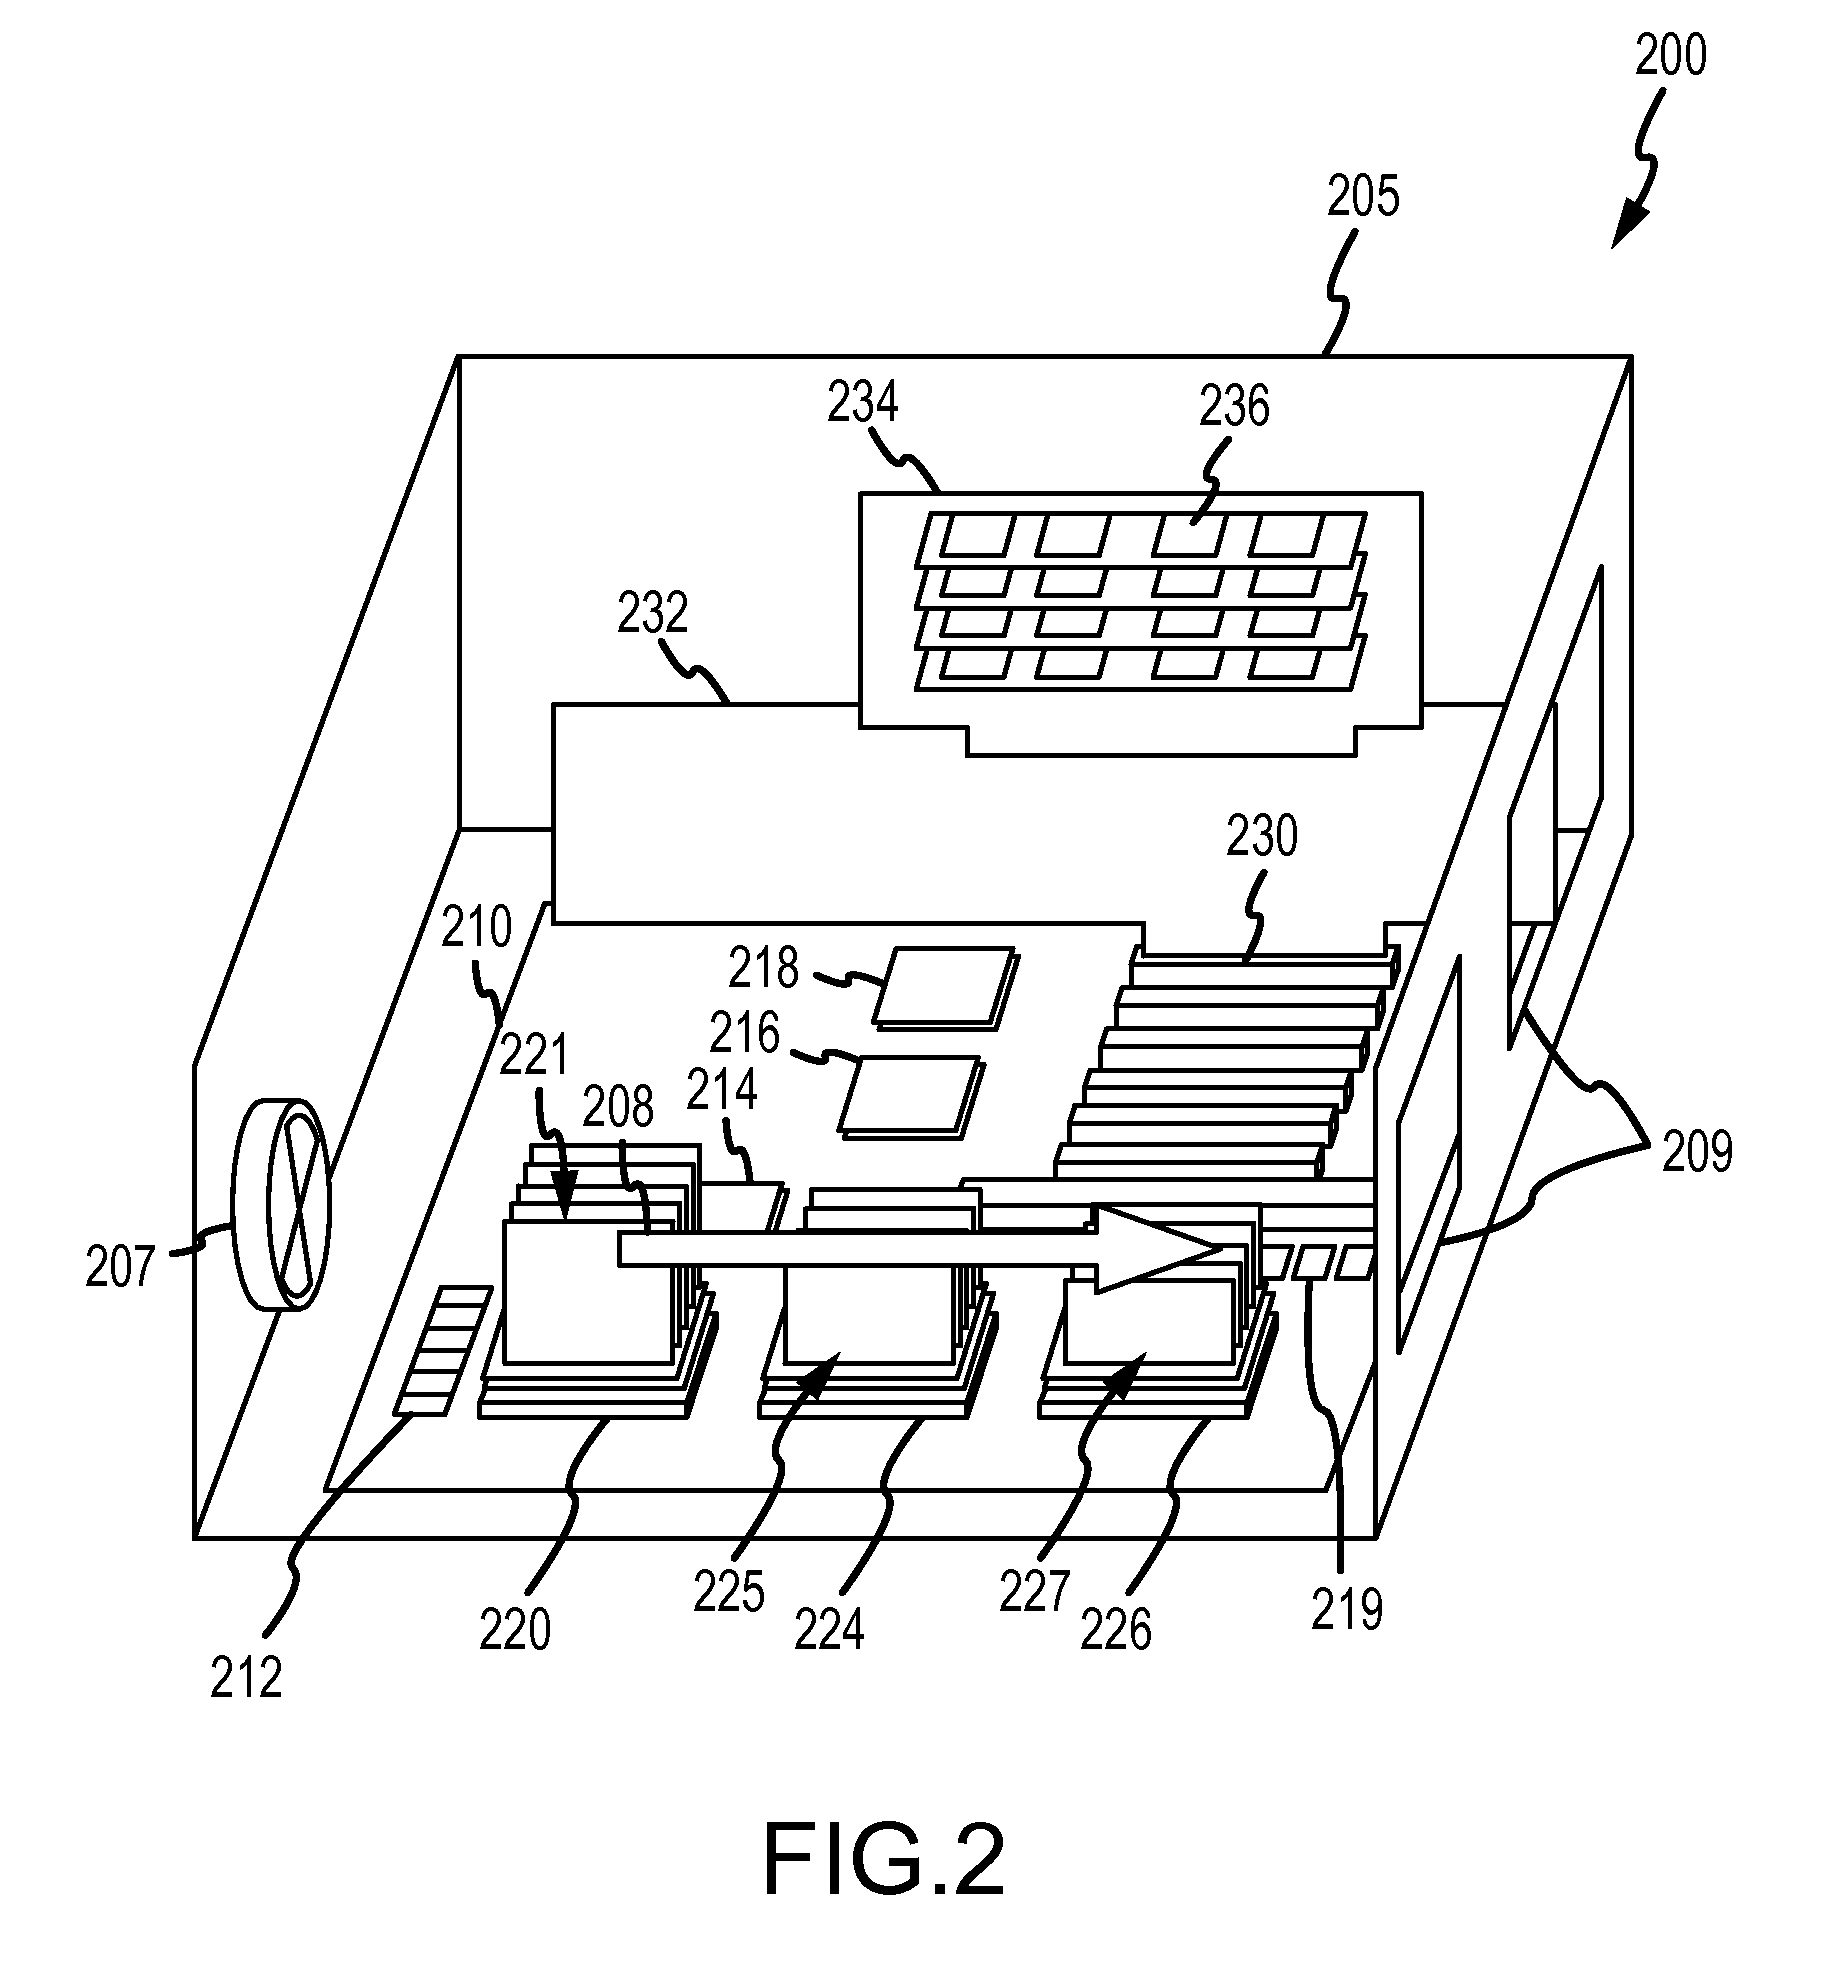 Modular absorption heat sink devices for passive cooling of servers and other electronics